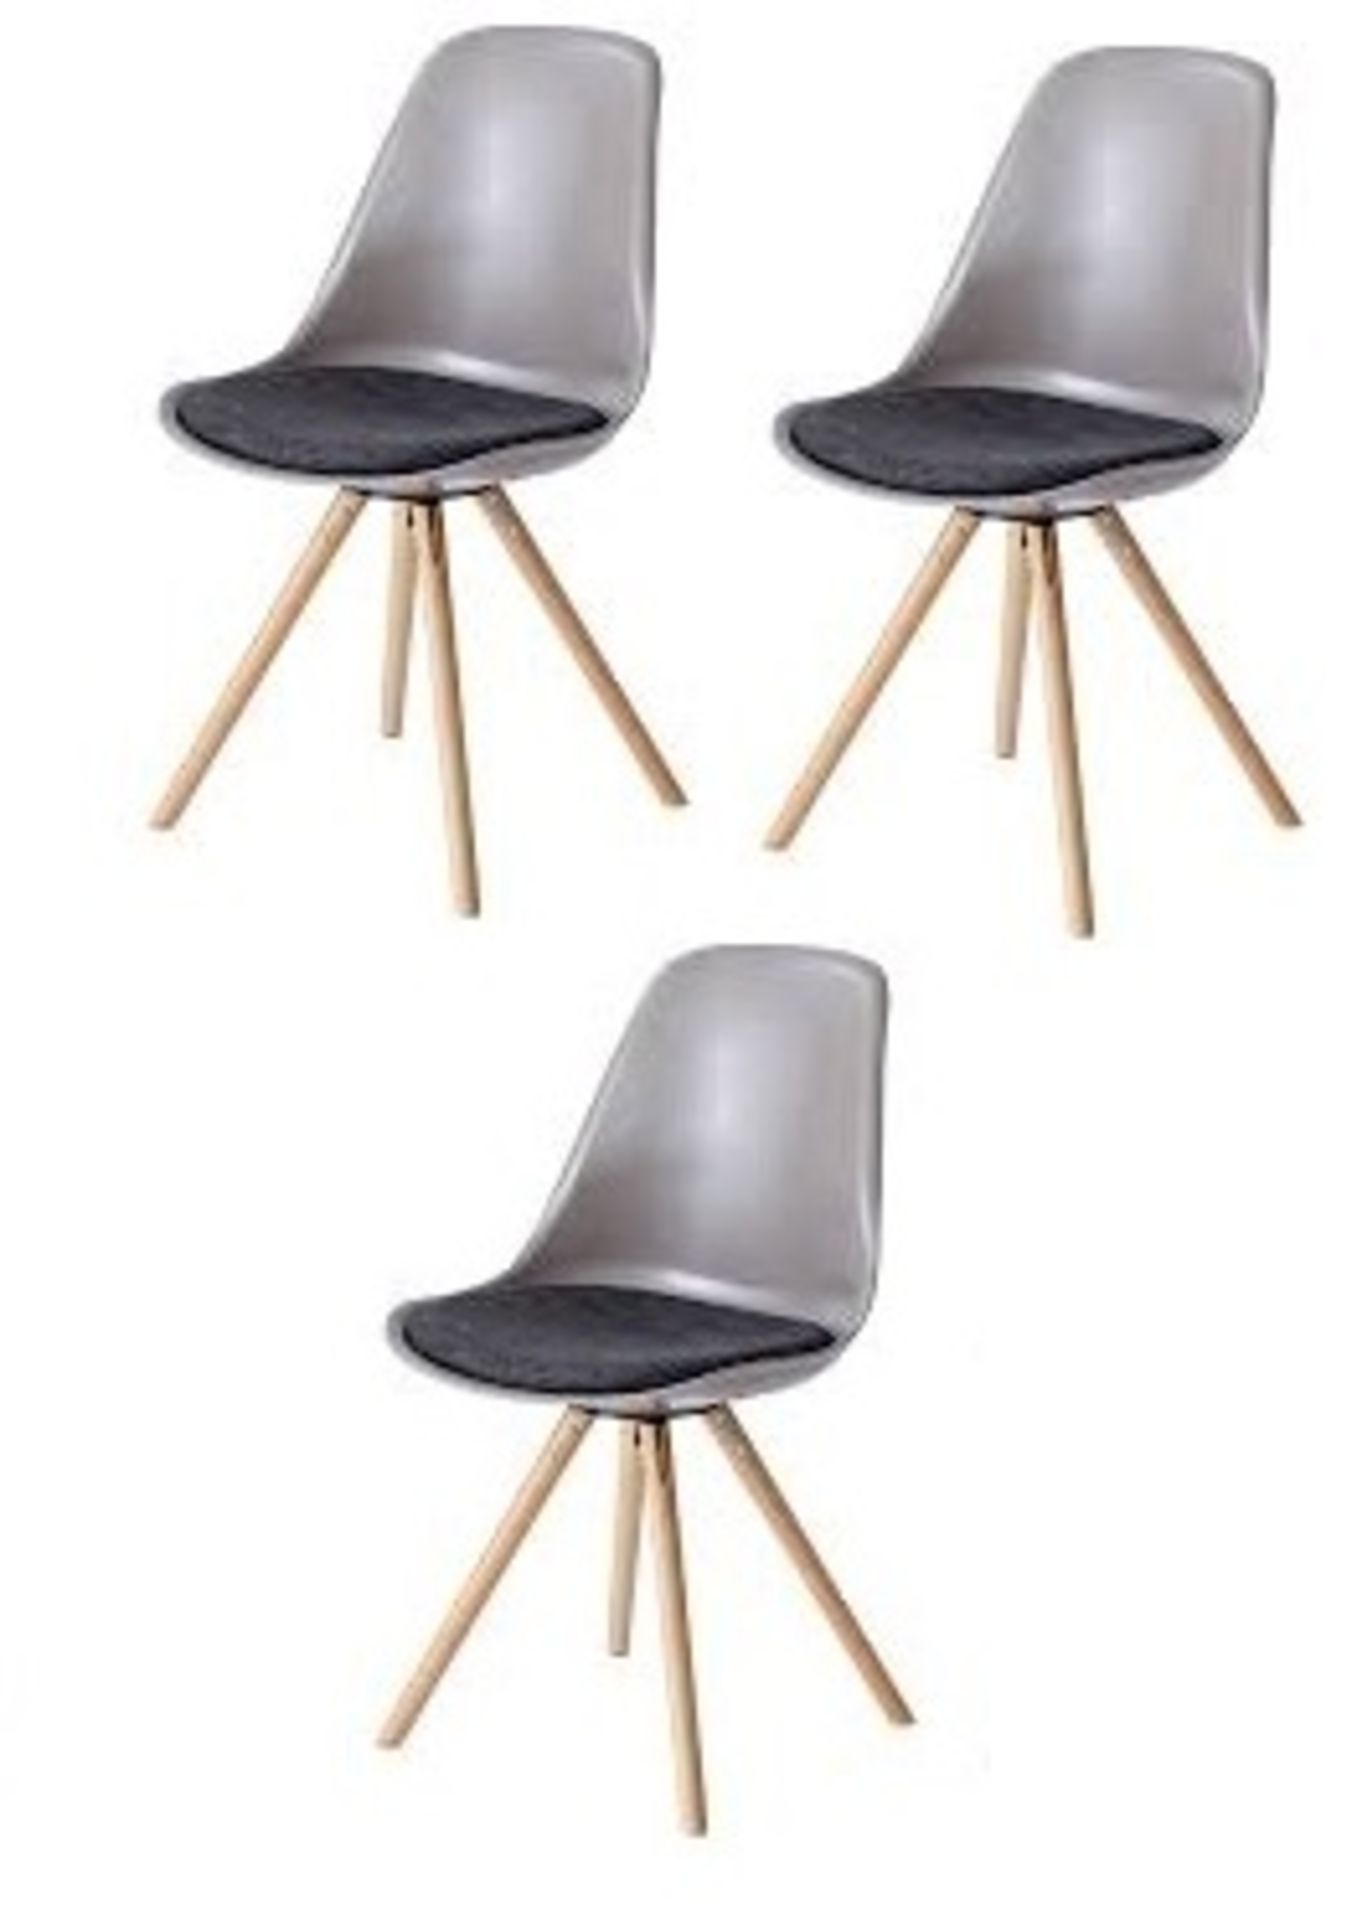 3 x Contemporary Scandinavian-style Dining Chairs in GREY - Mid Century Design With Deep Seats